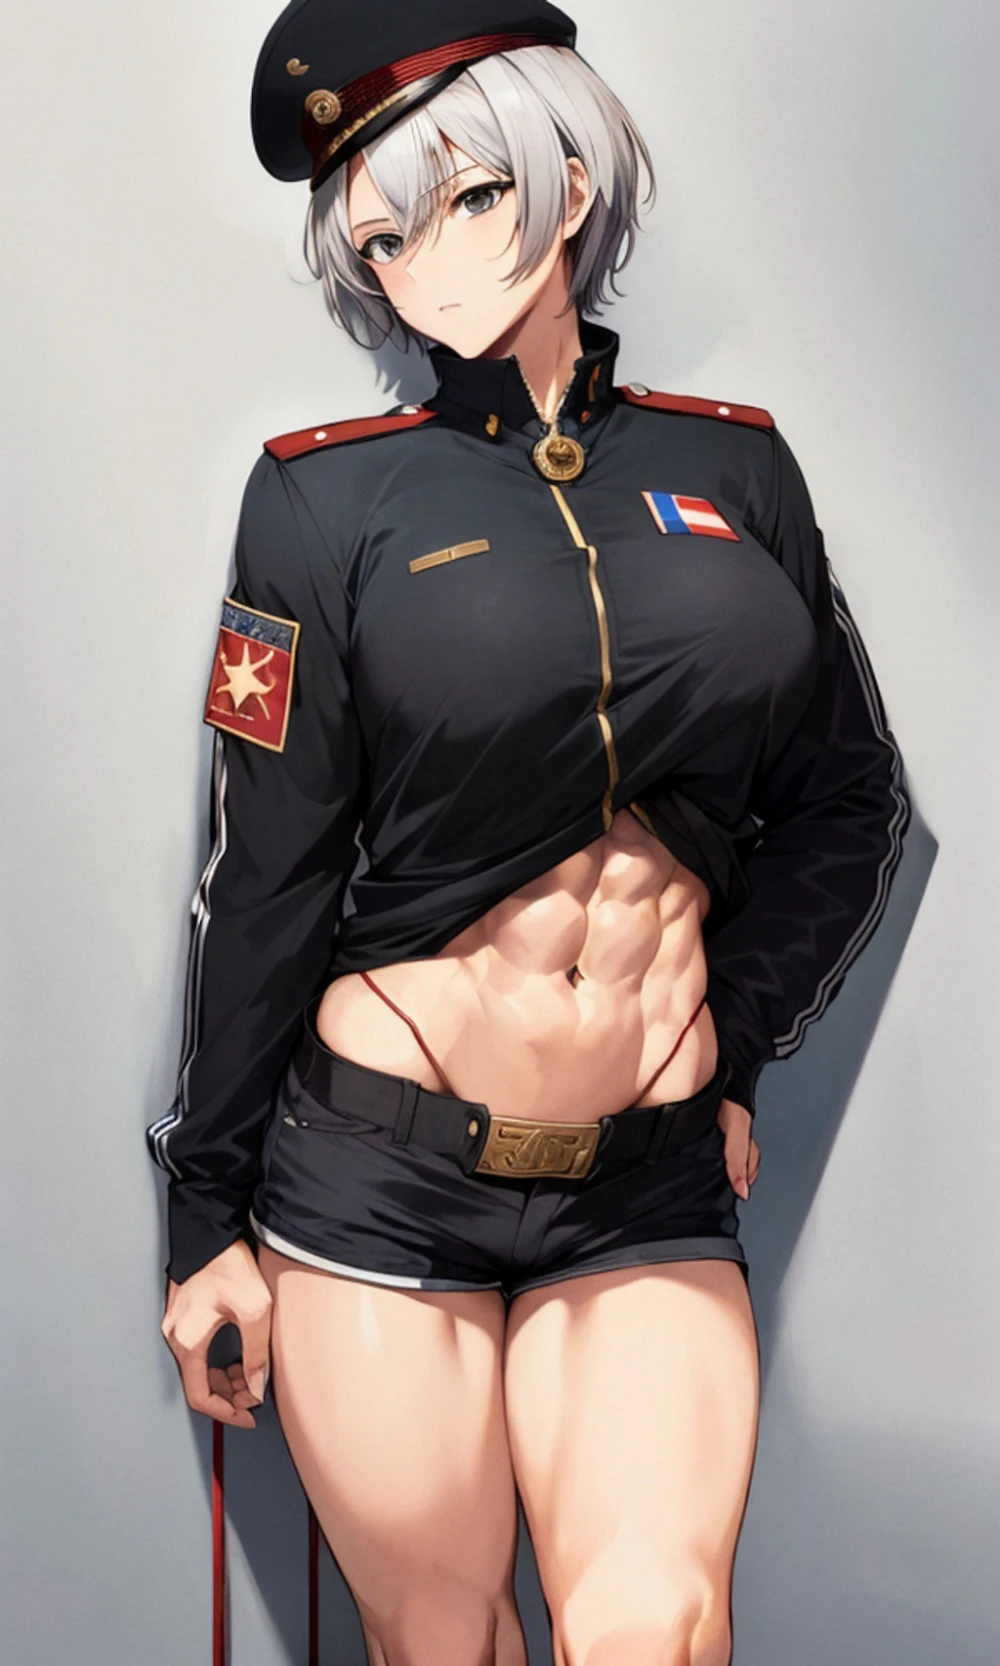 military-uniform-anime-style-all-ages-47